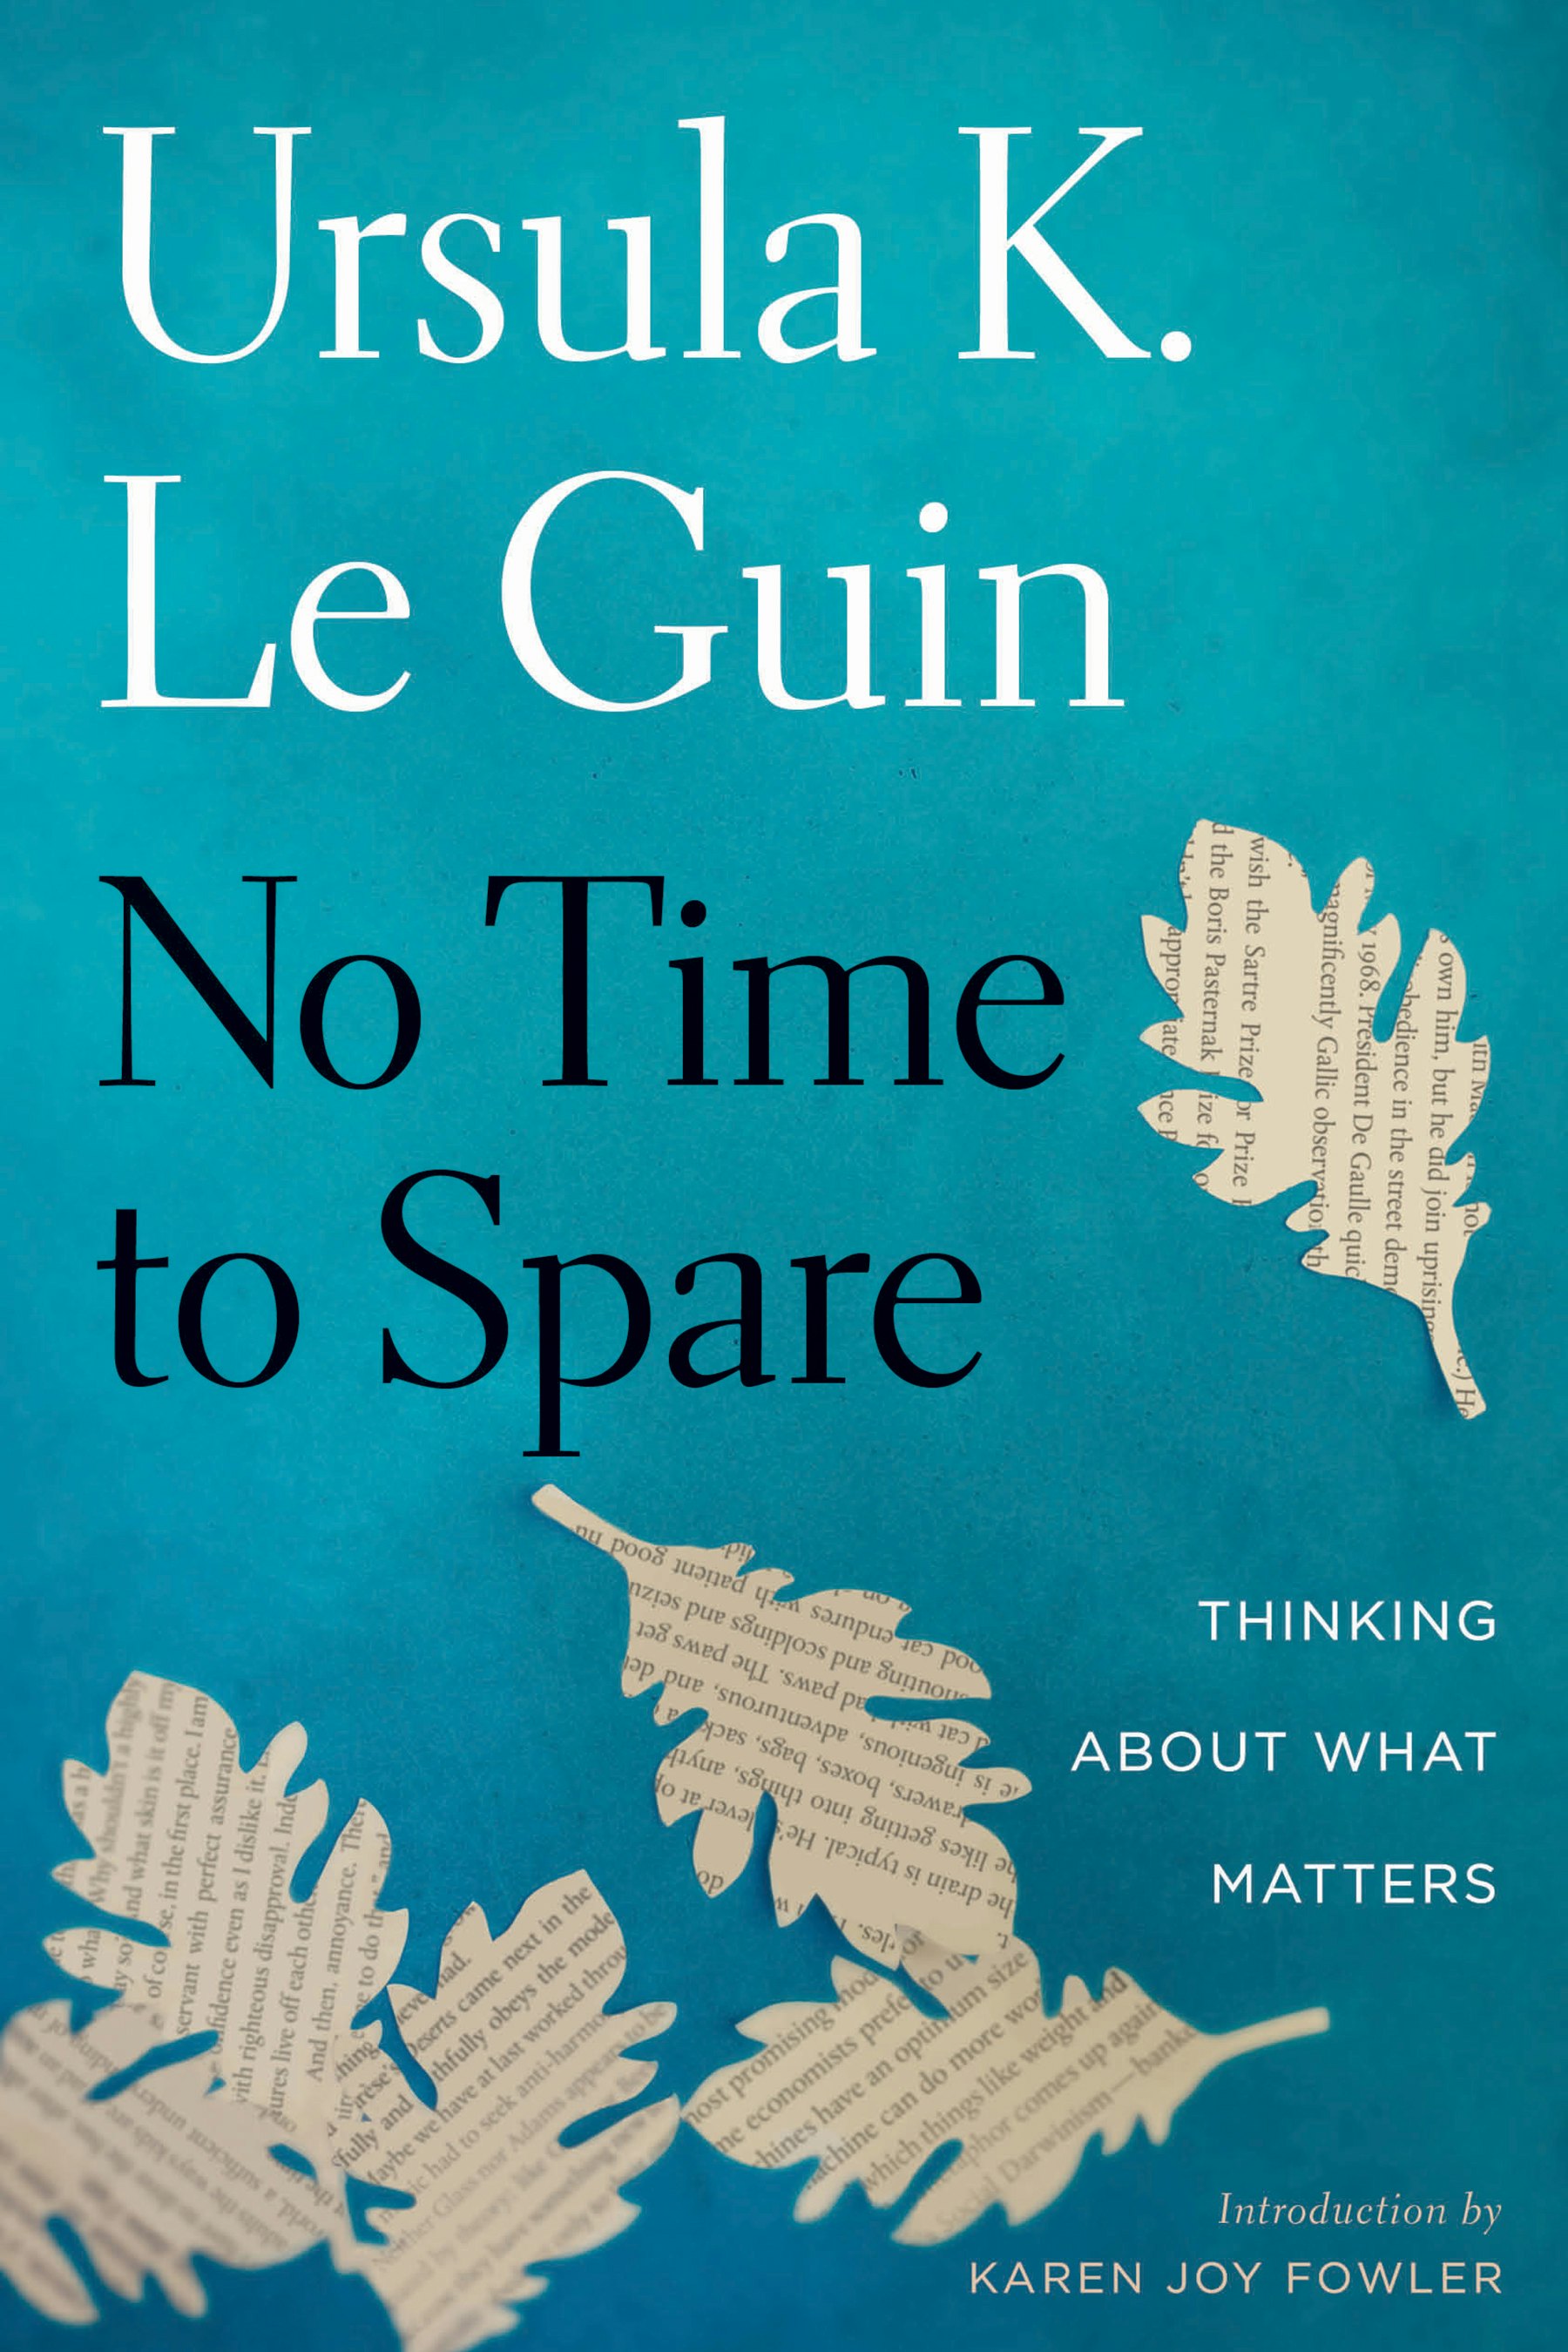 no time to spare le guin